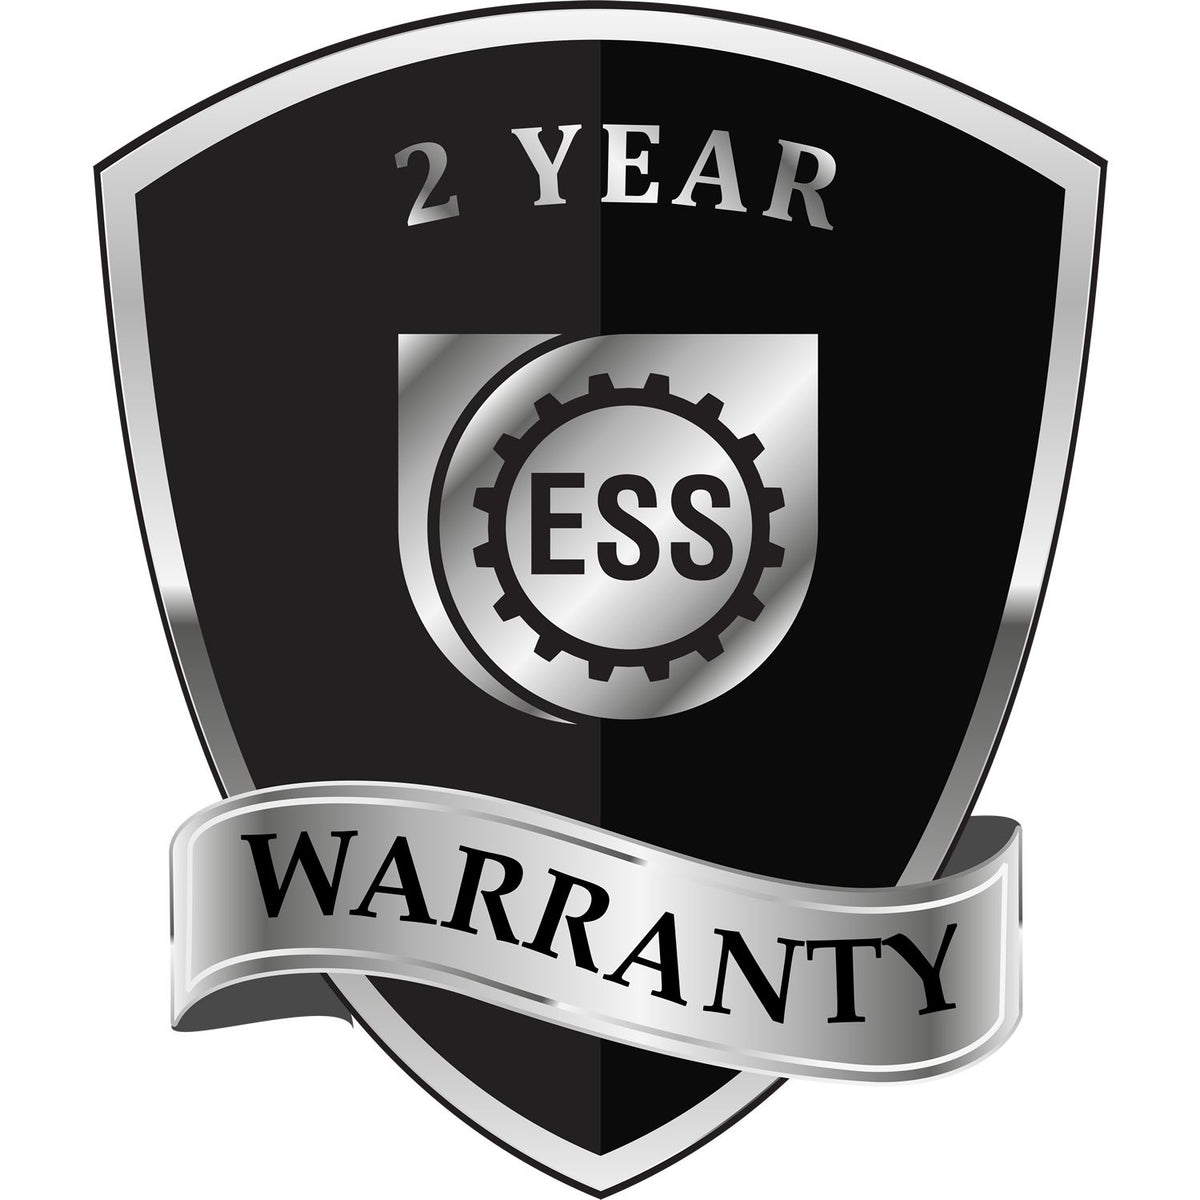 A badge or emblem showing a warranty icon for the Extended Long Reach Maine Architect Seal Embosser